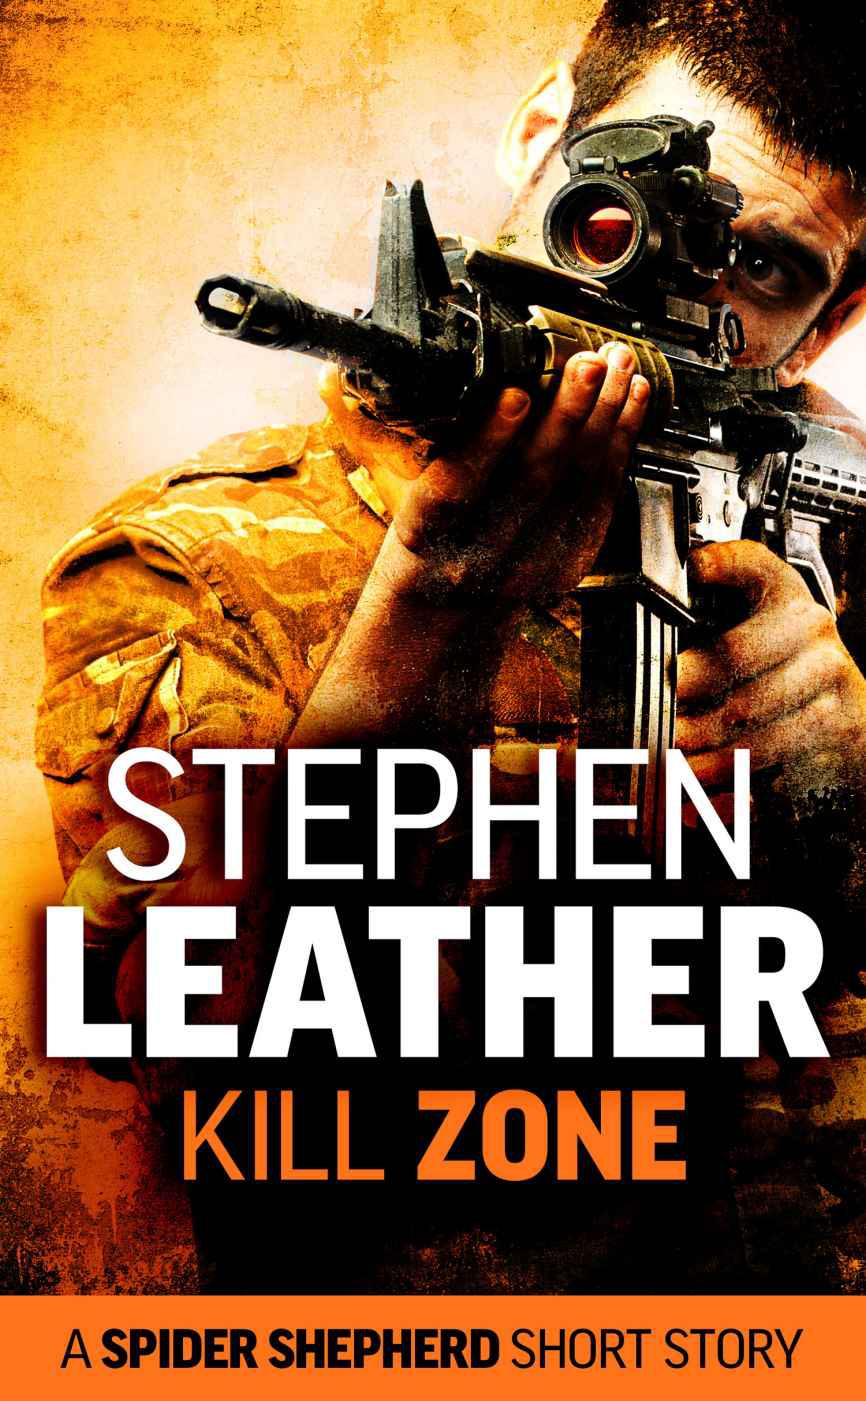 Kill Zone (A Spider Shepherd Short Story) by Stephen Leather